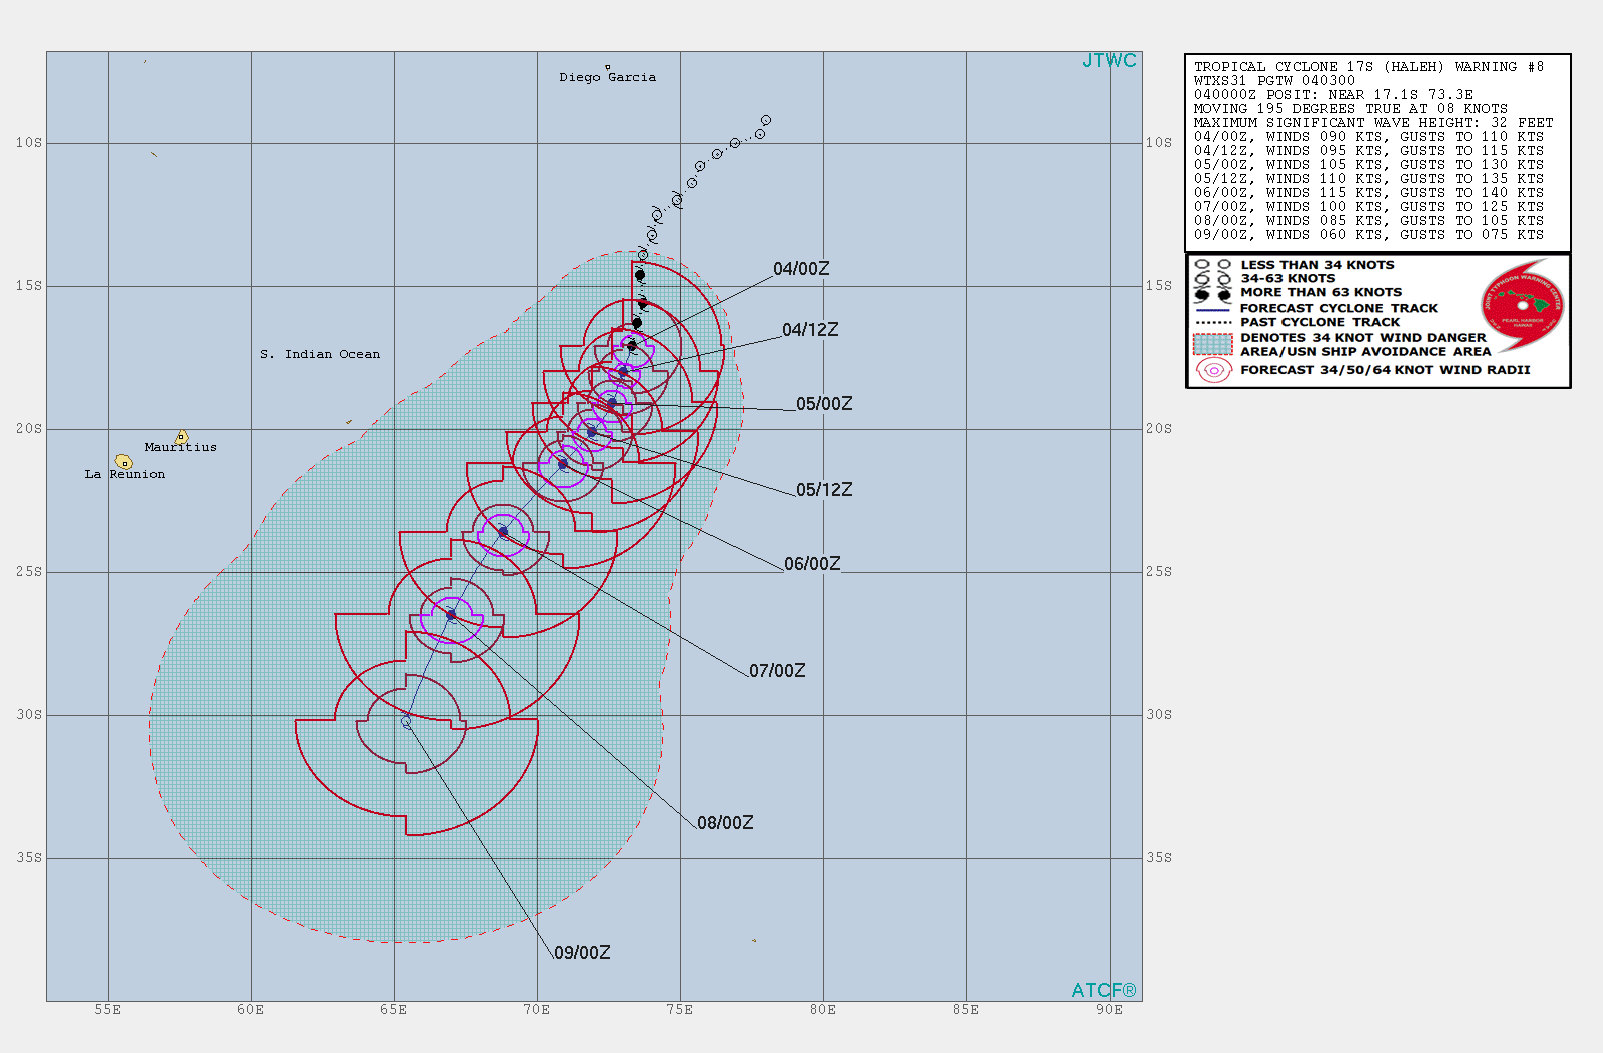 03UTC: TC HALEH(17S): category 2 US and intensifying, possible peak at category 4 US in 48hours